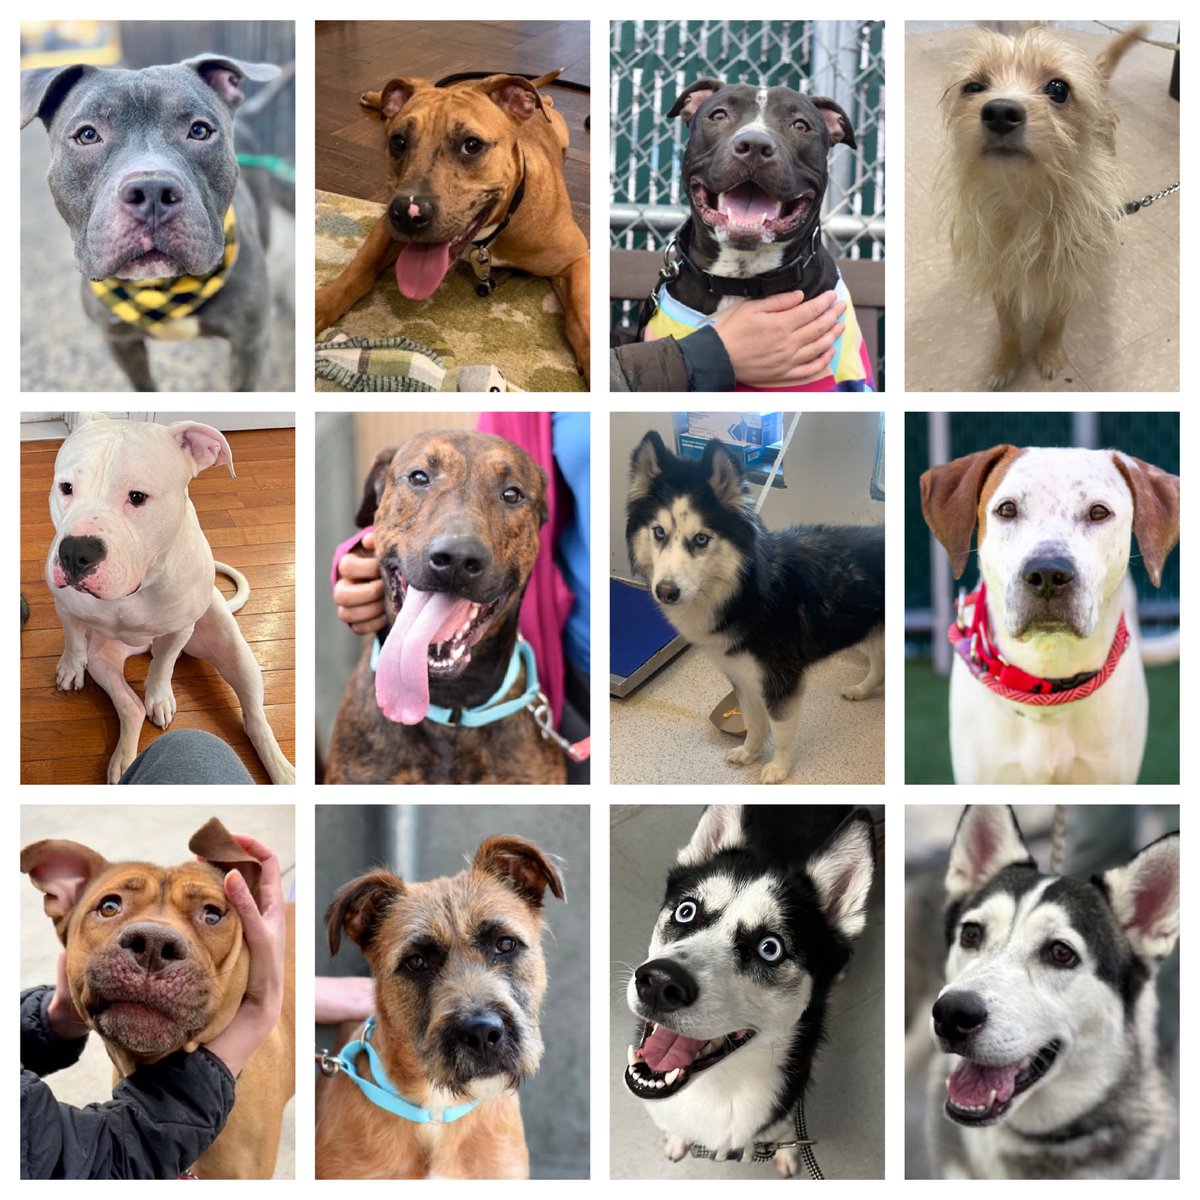 The house of death NYCACC has released Thursday's TBK list featuring 22 dogs, 12 of which are new to the list. Plus Wendy, Sadie, Pinky and Little who are DELISTED and can die at anytime. Please help us help them: repost/share and pledge where you can, email…